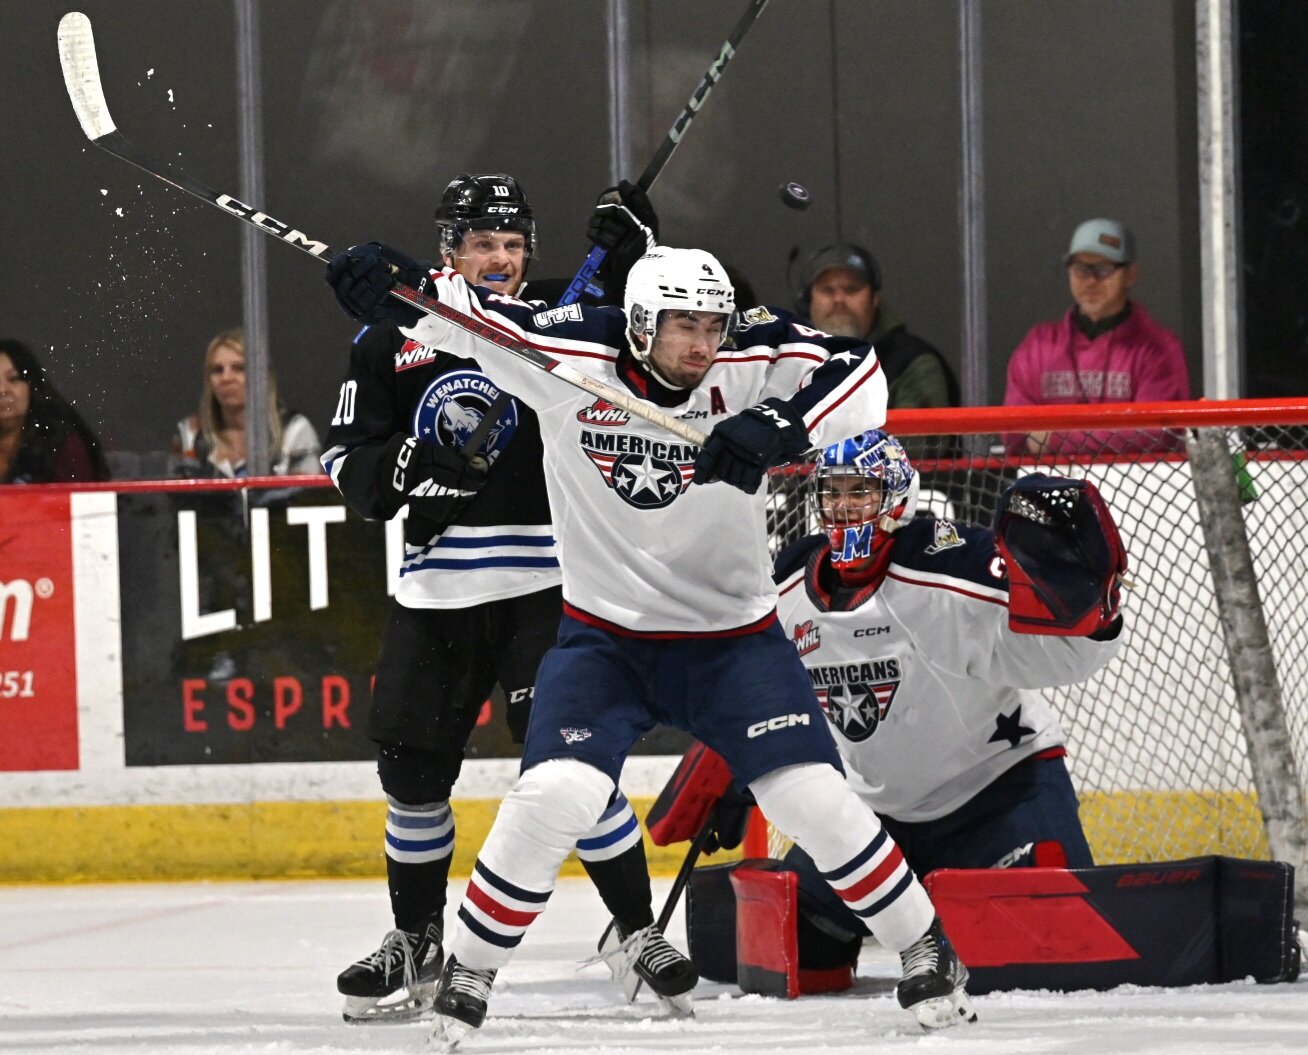 Wenatchee Wild forward Evan Friesen jostles with Tri-City Americans defenseman Ethan Peters (4, center) in front of Lukas Matecha (right) and the Tri-City net. Friesen scored the lone Wild goal Wednesday in a 4-1 loss to the Americans at Town Toyota Center.